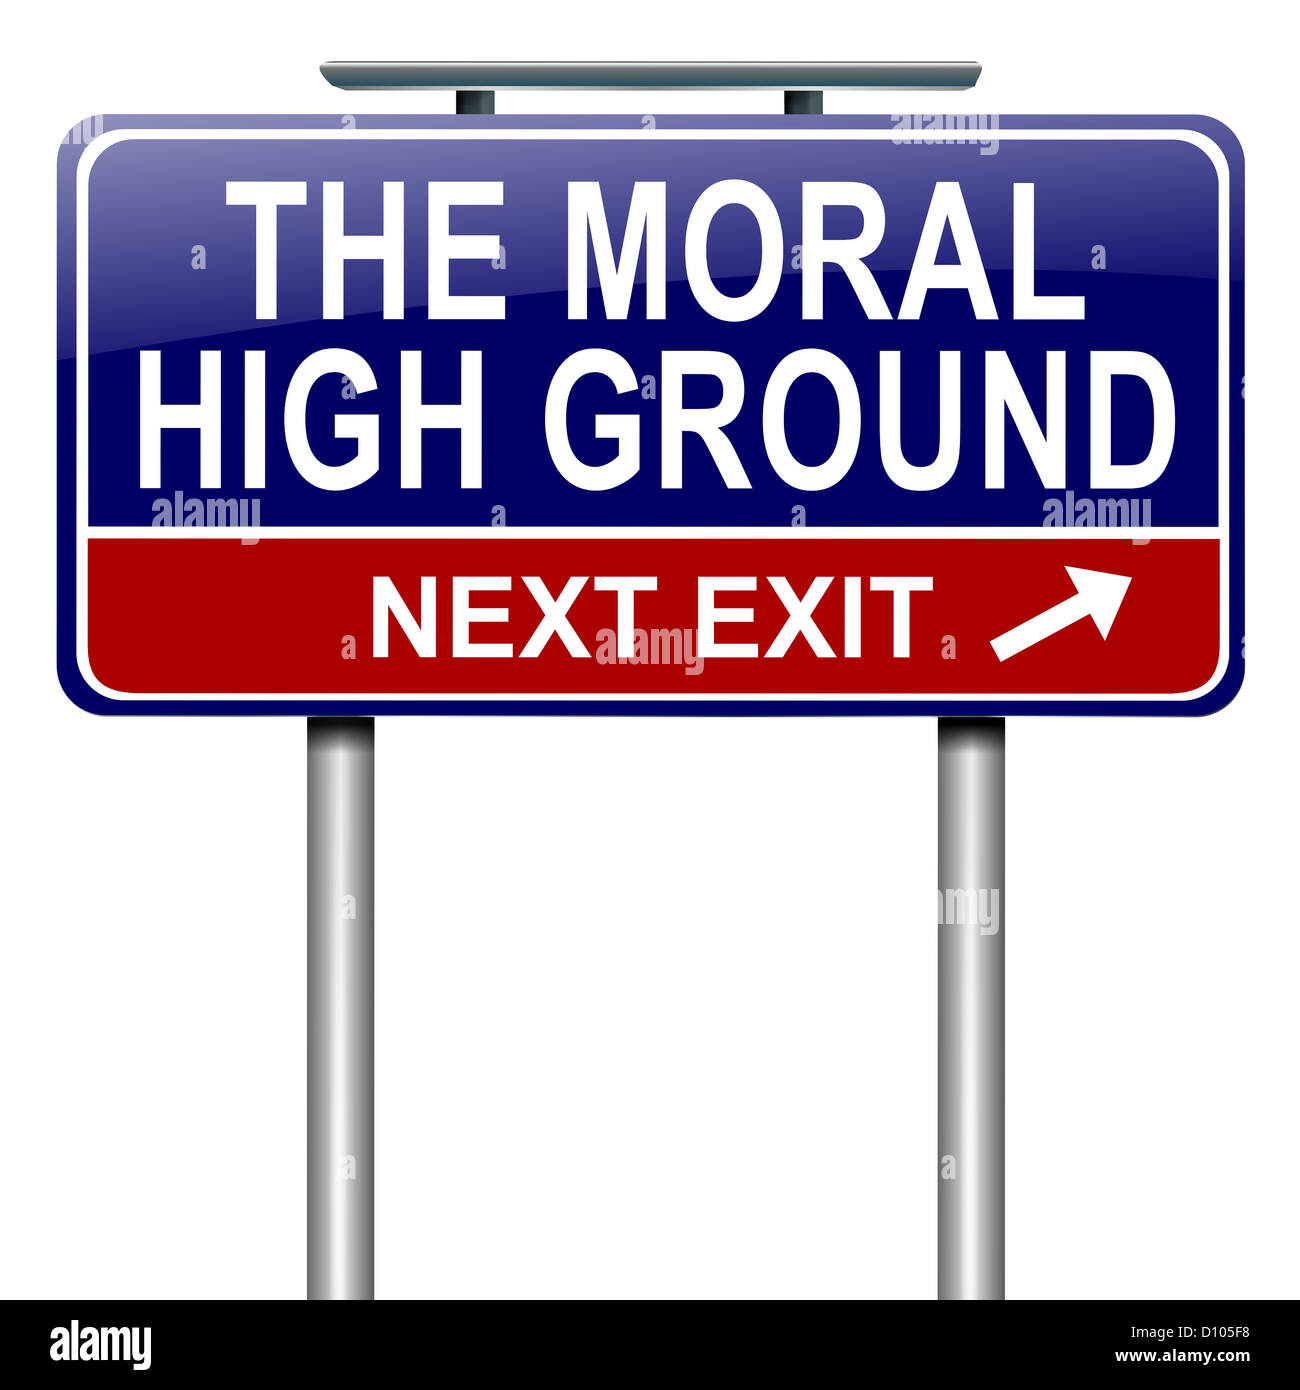 The moral high ground. Stock Photo